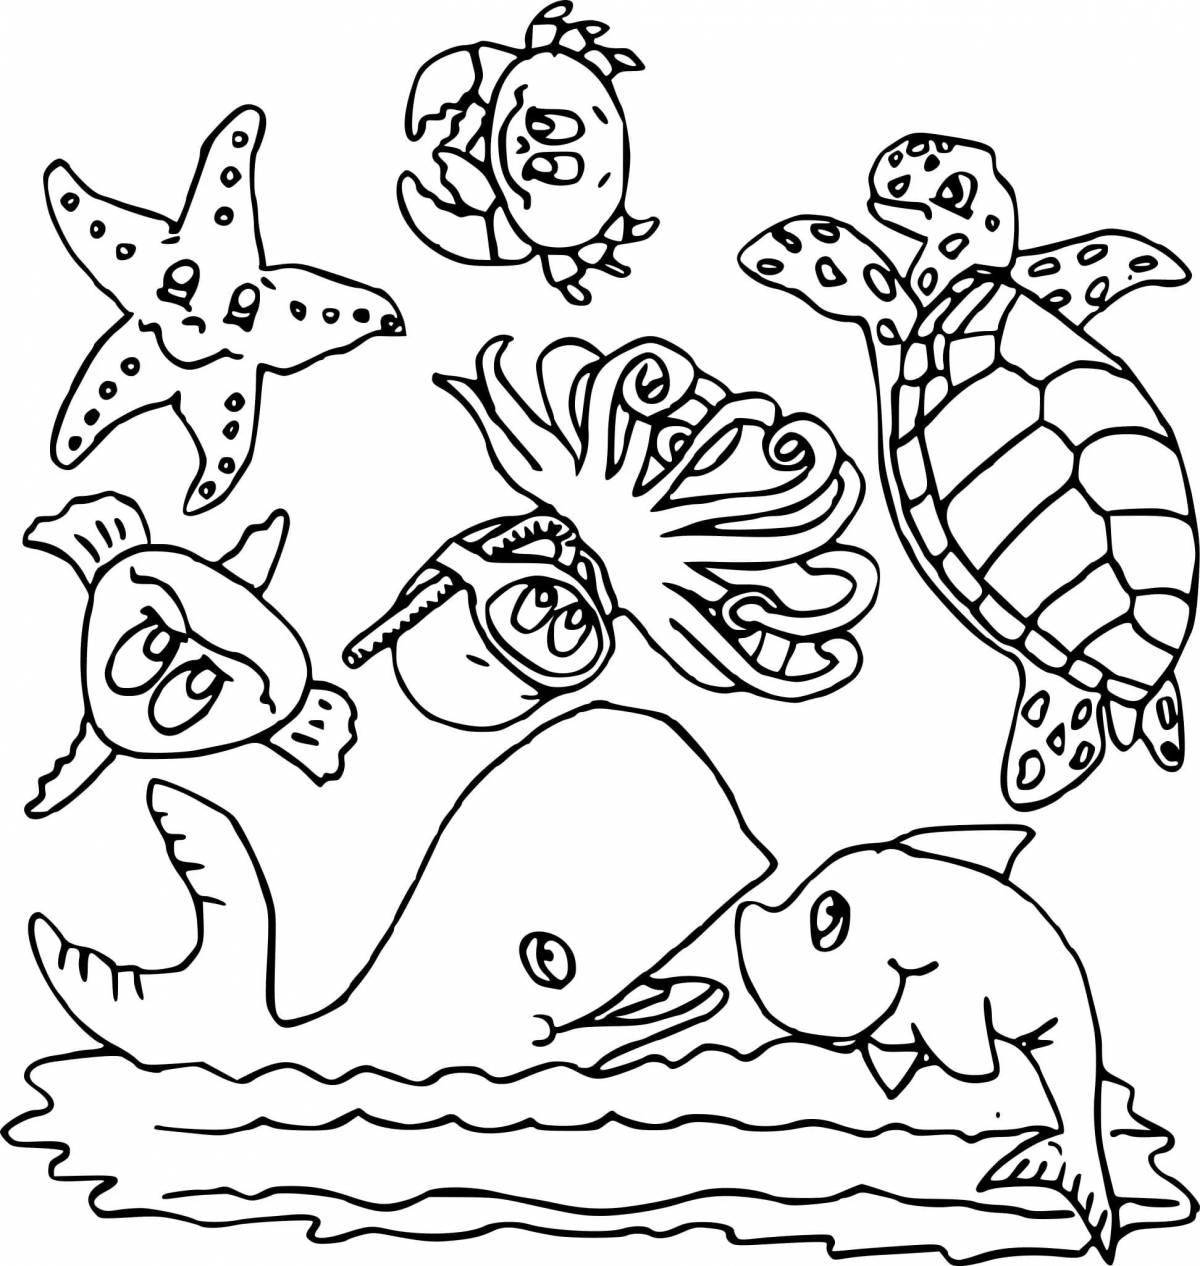 Amazing marine life coloring pages for kids